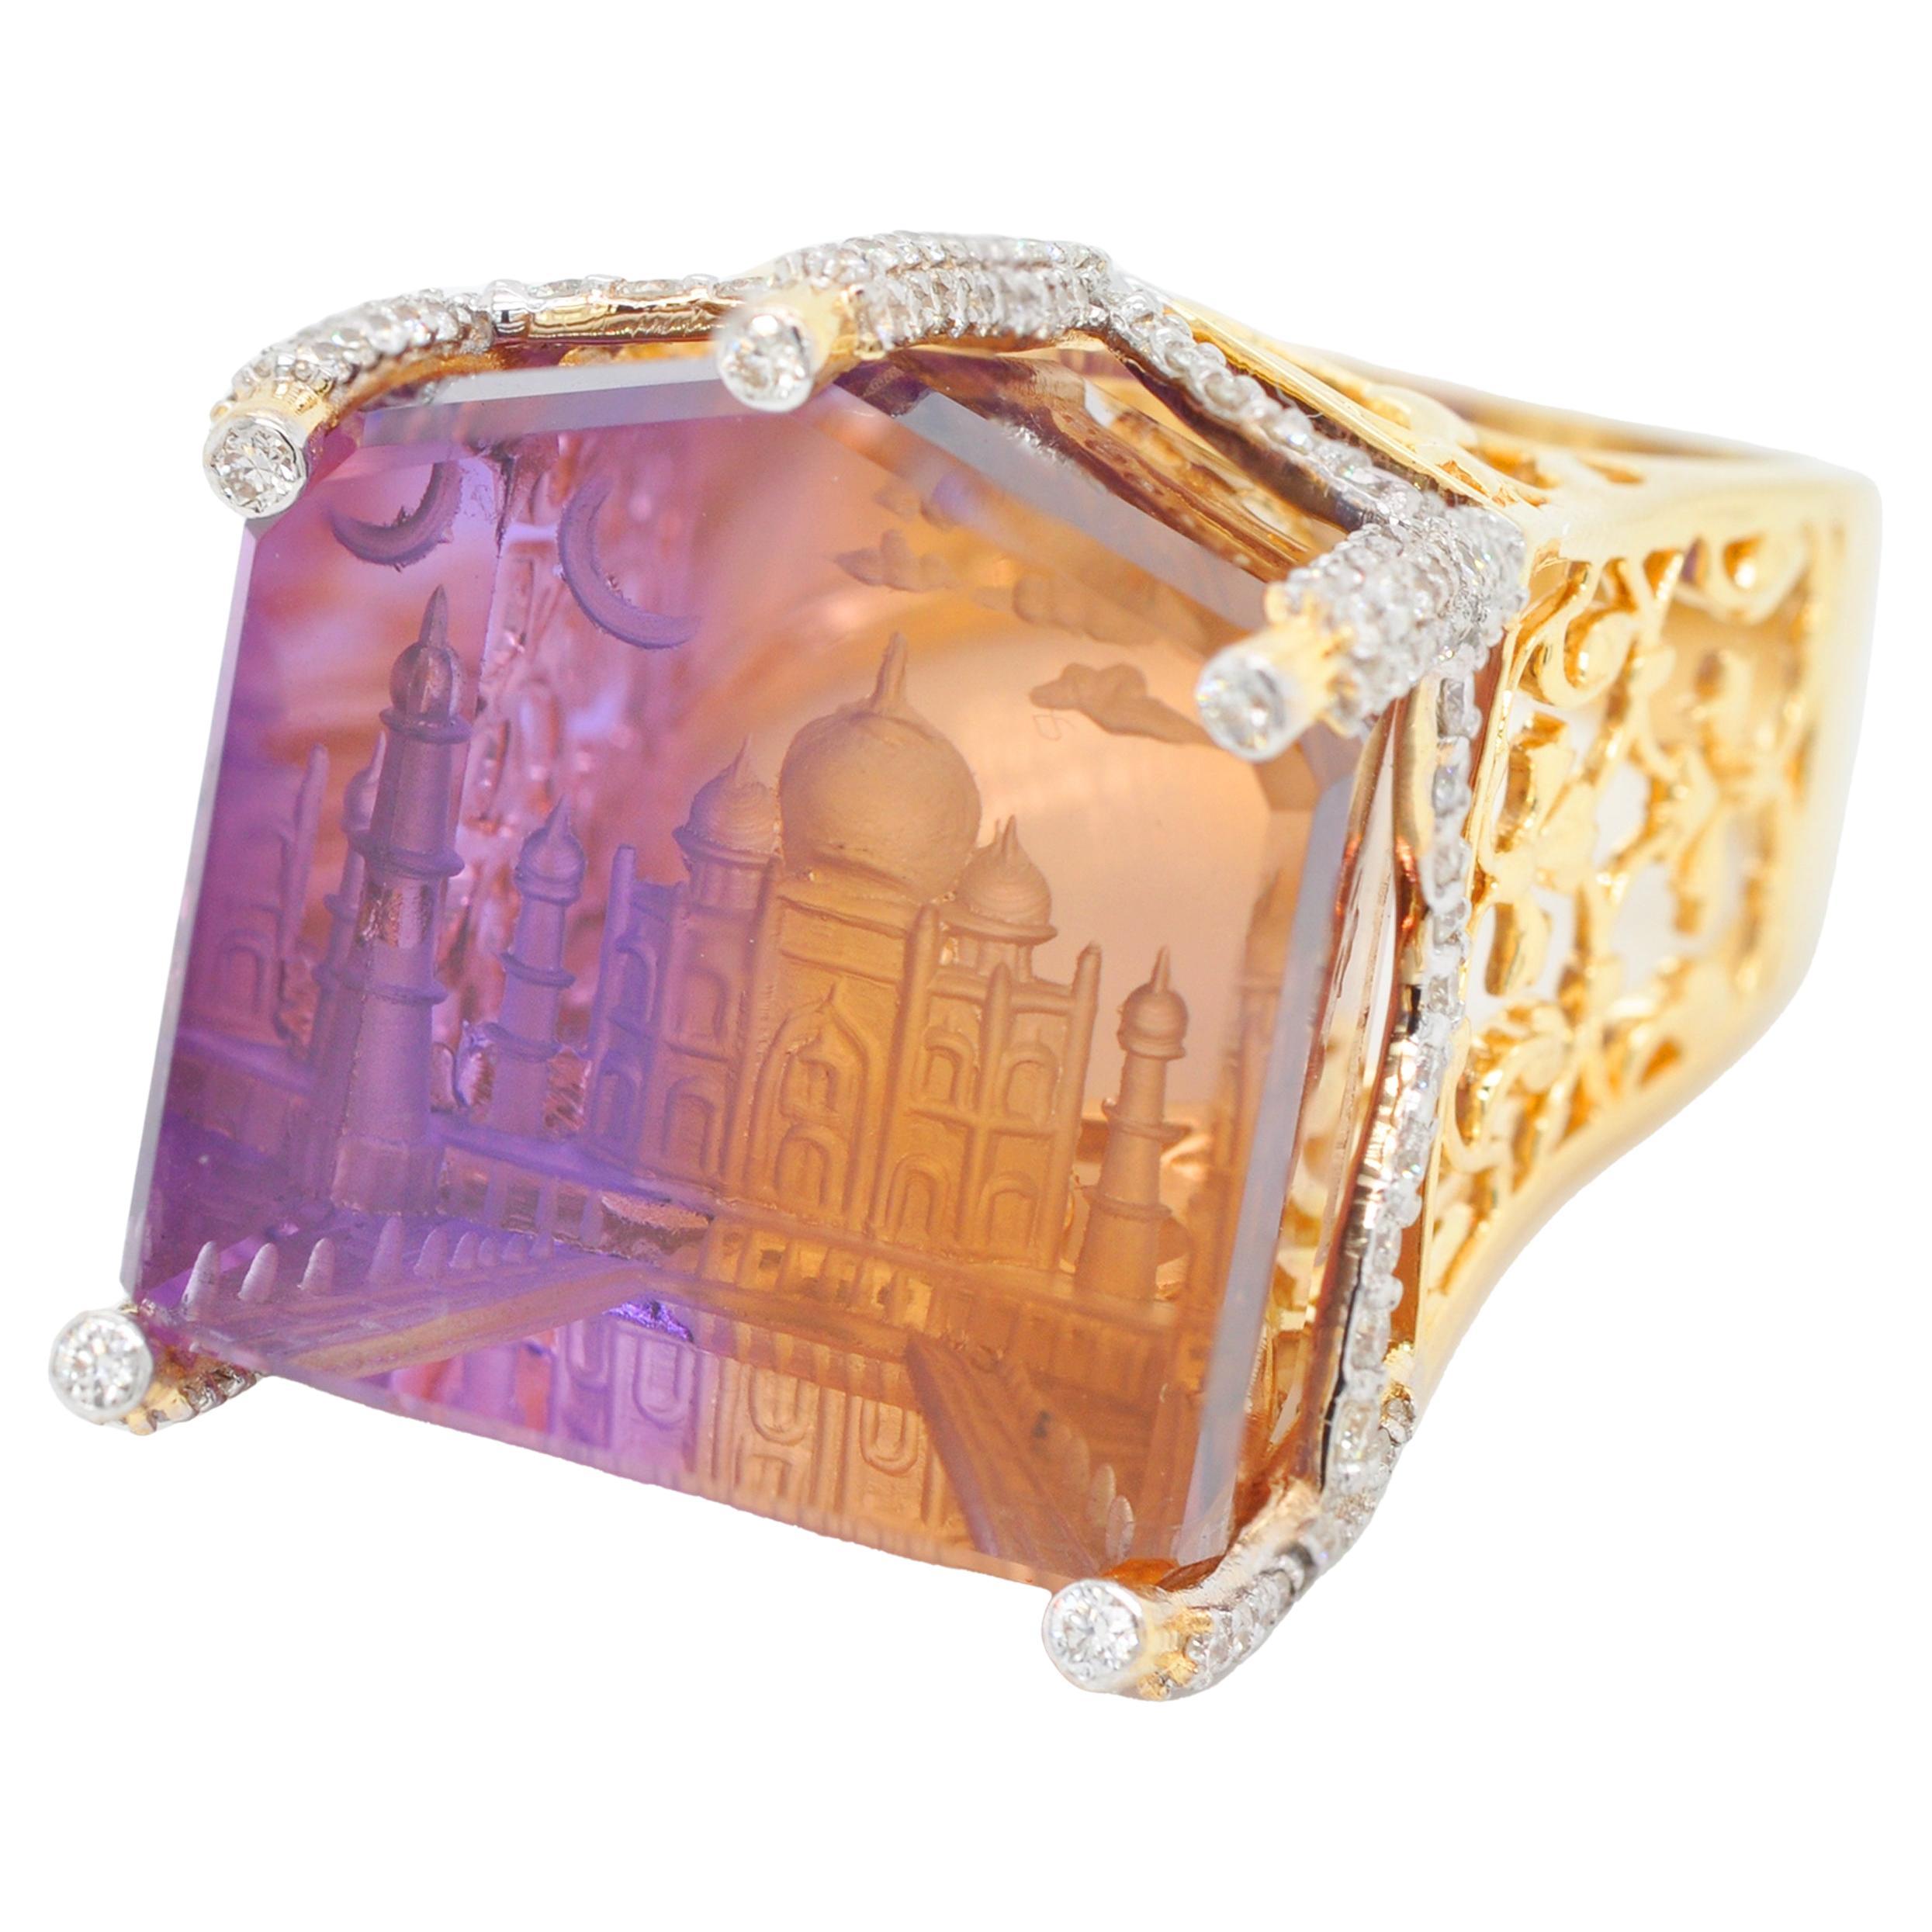 18 karat gold bolivian ametrine taj mahal intaglio hand-carved diamond unique cocktail ring.

Introducing the one-of-a-kind Ametrine Taj Mahal Ring, a masterpiece of artistry and craftsmanship. Set in 18K gold and adorned with diamonds, this ring